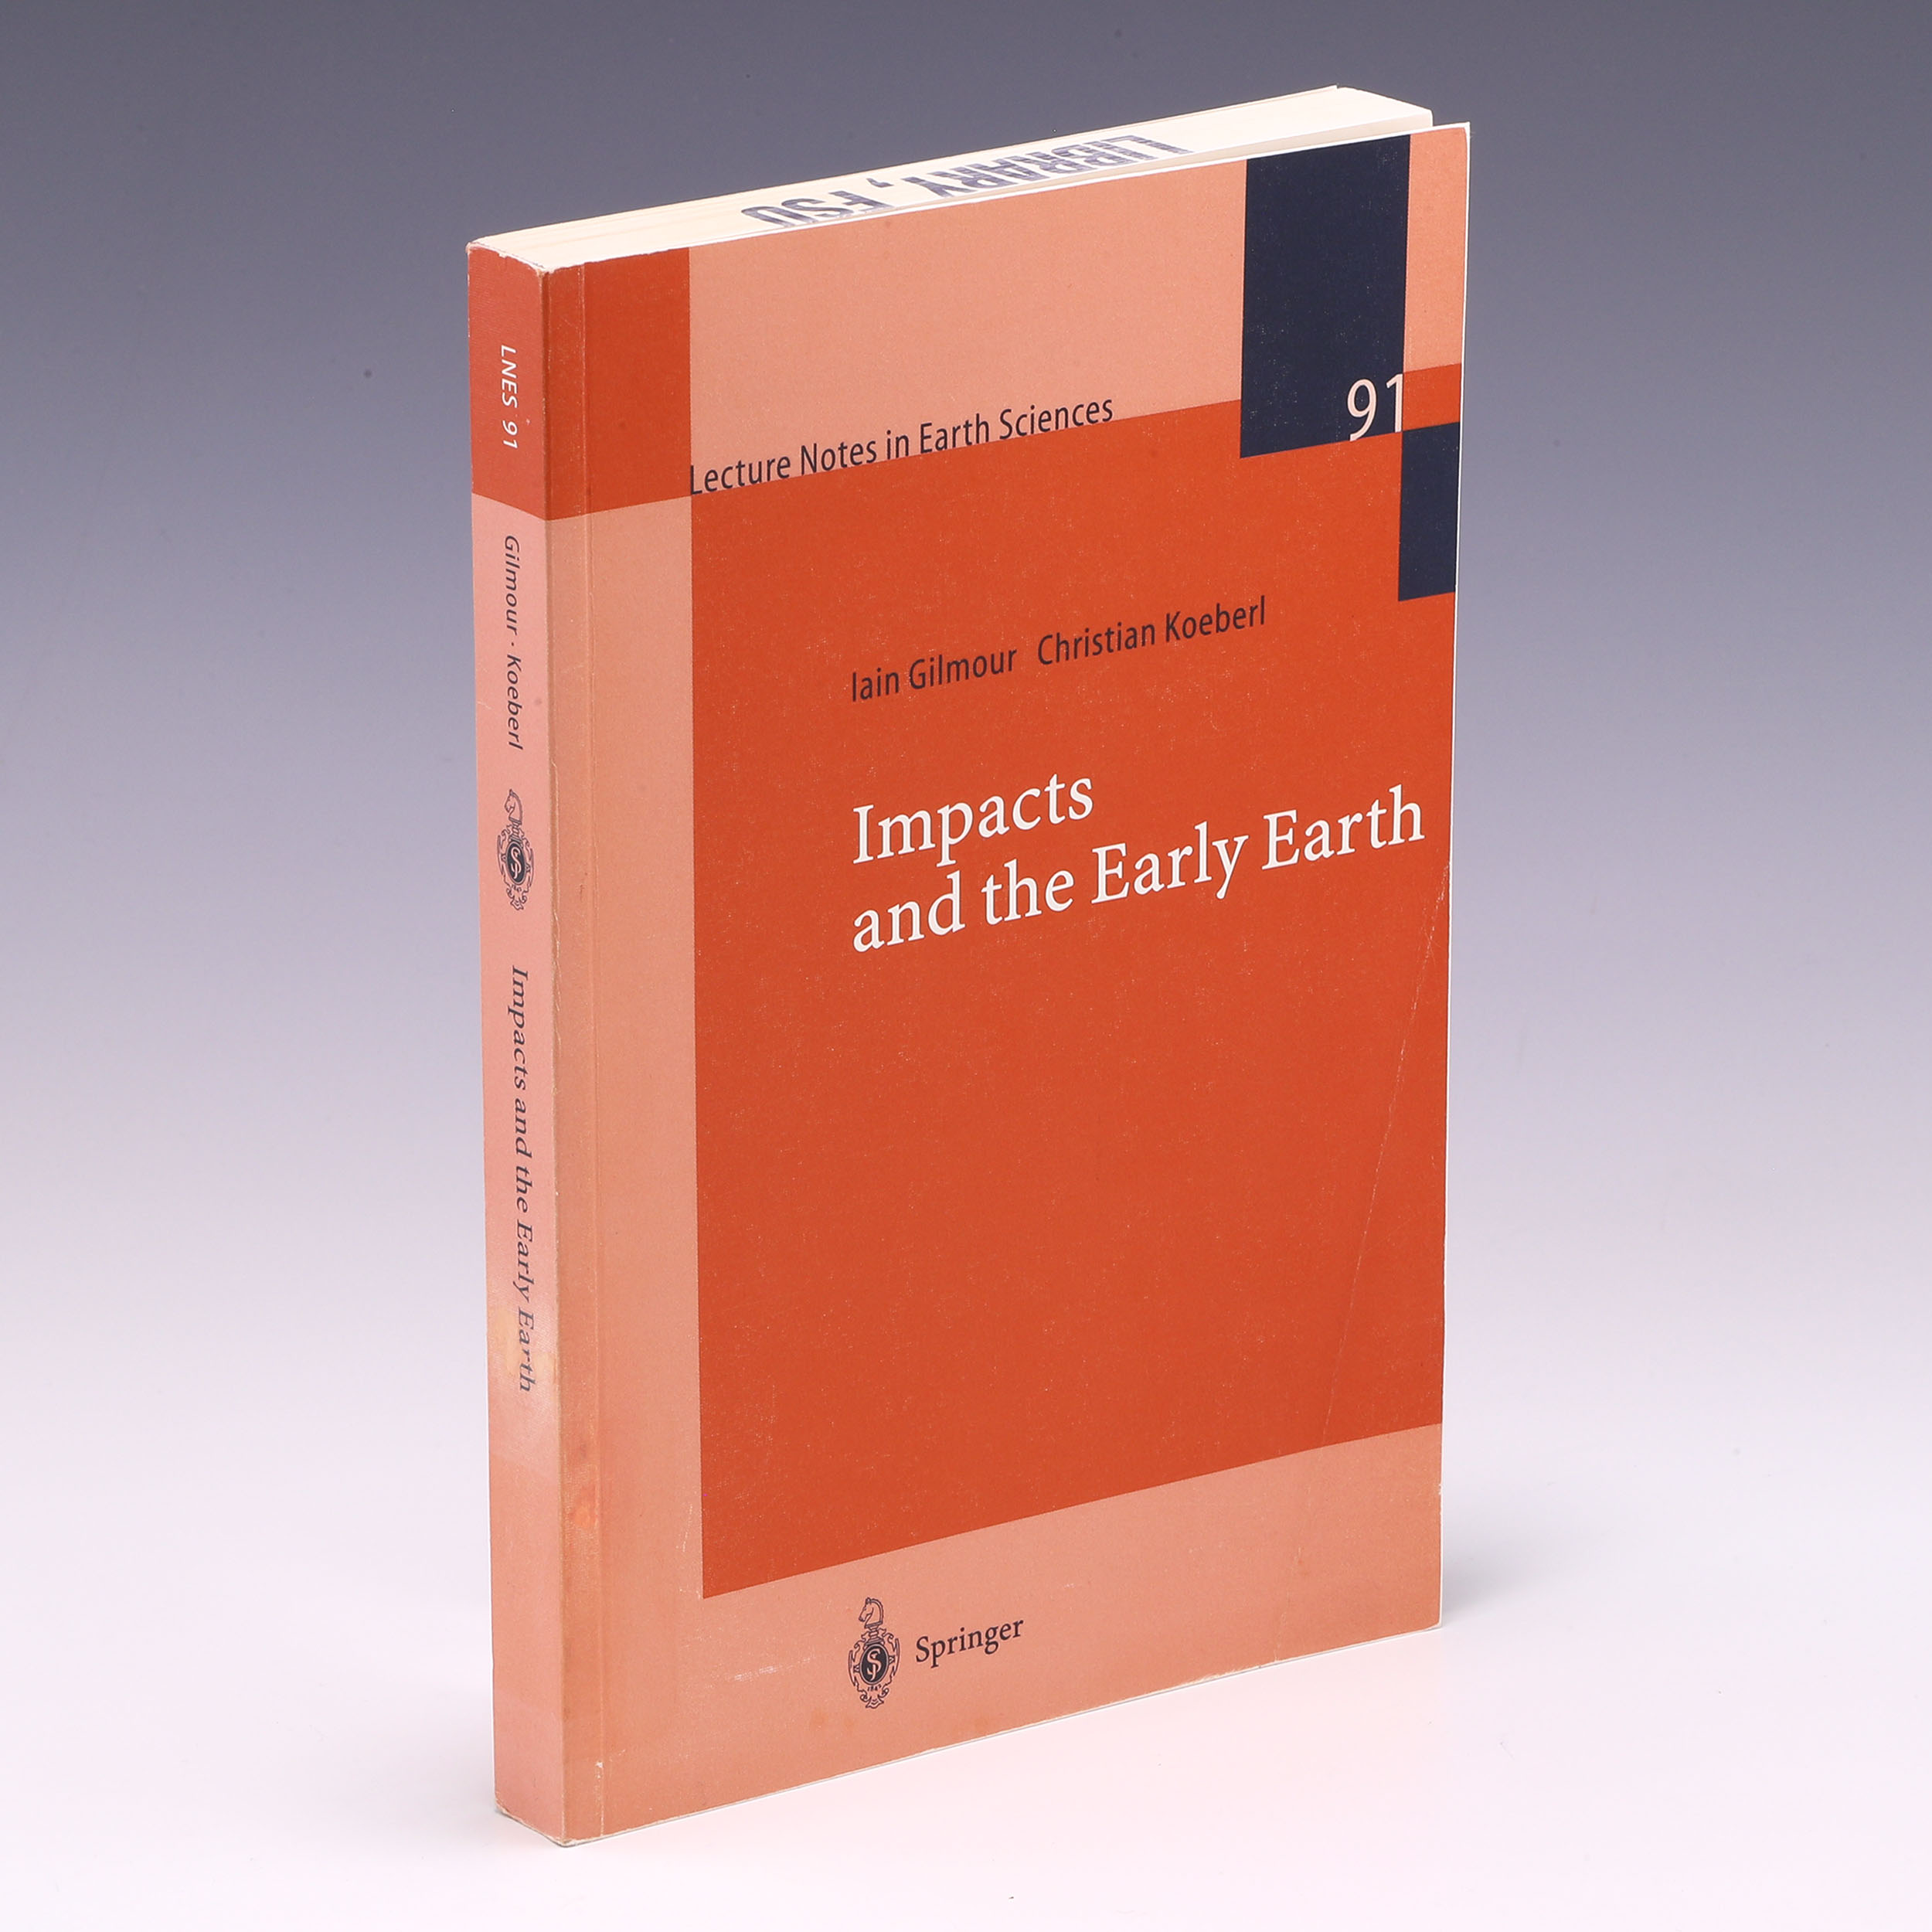 Impacts and the Early Earth (Lecture Notes in Earth Sciences) - Gilmour and Koeberl